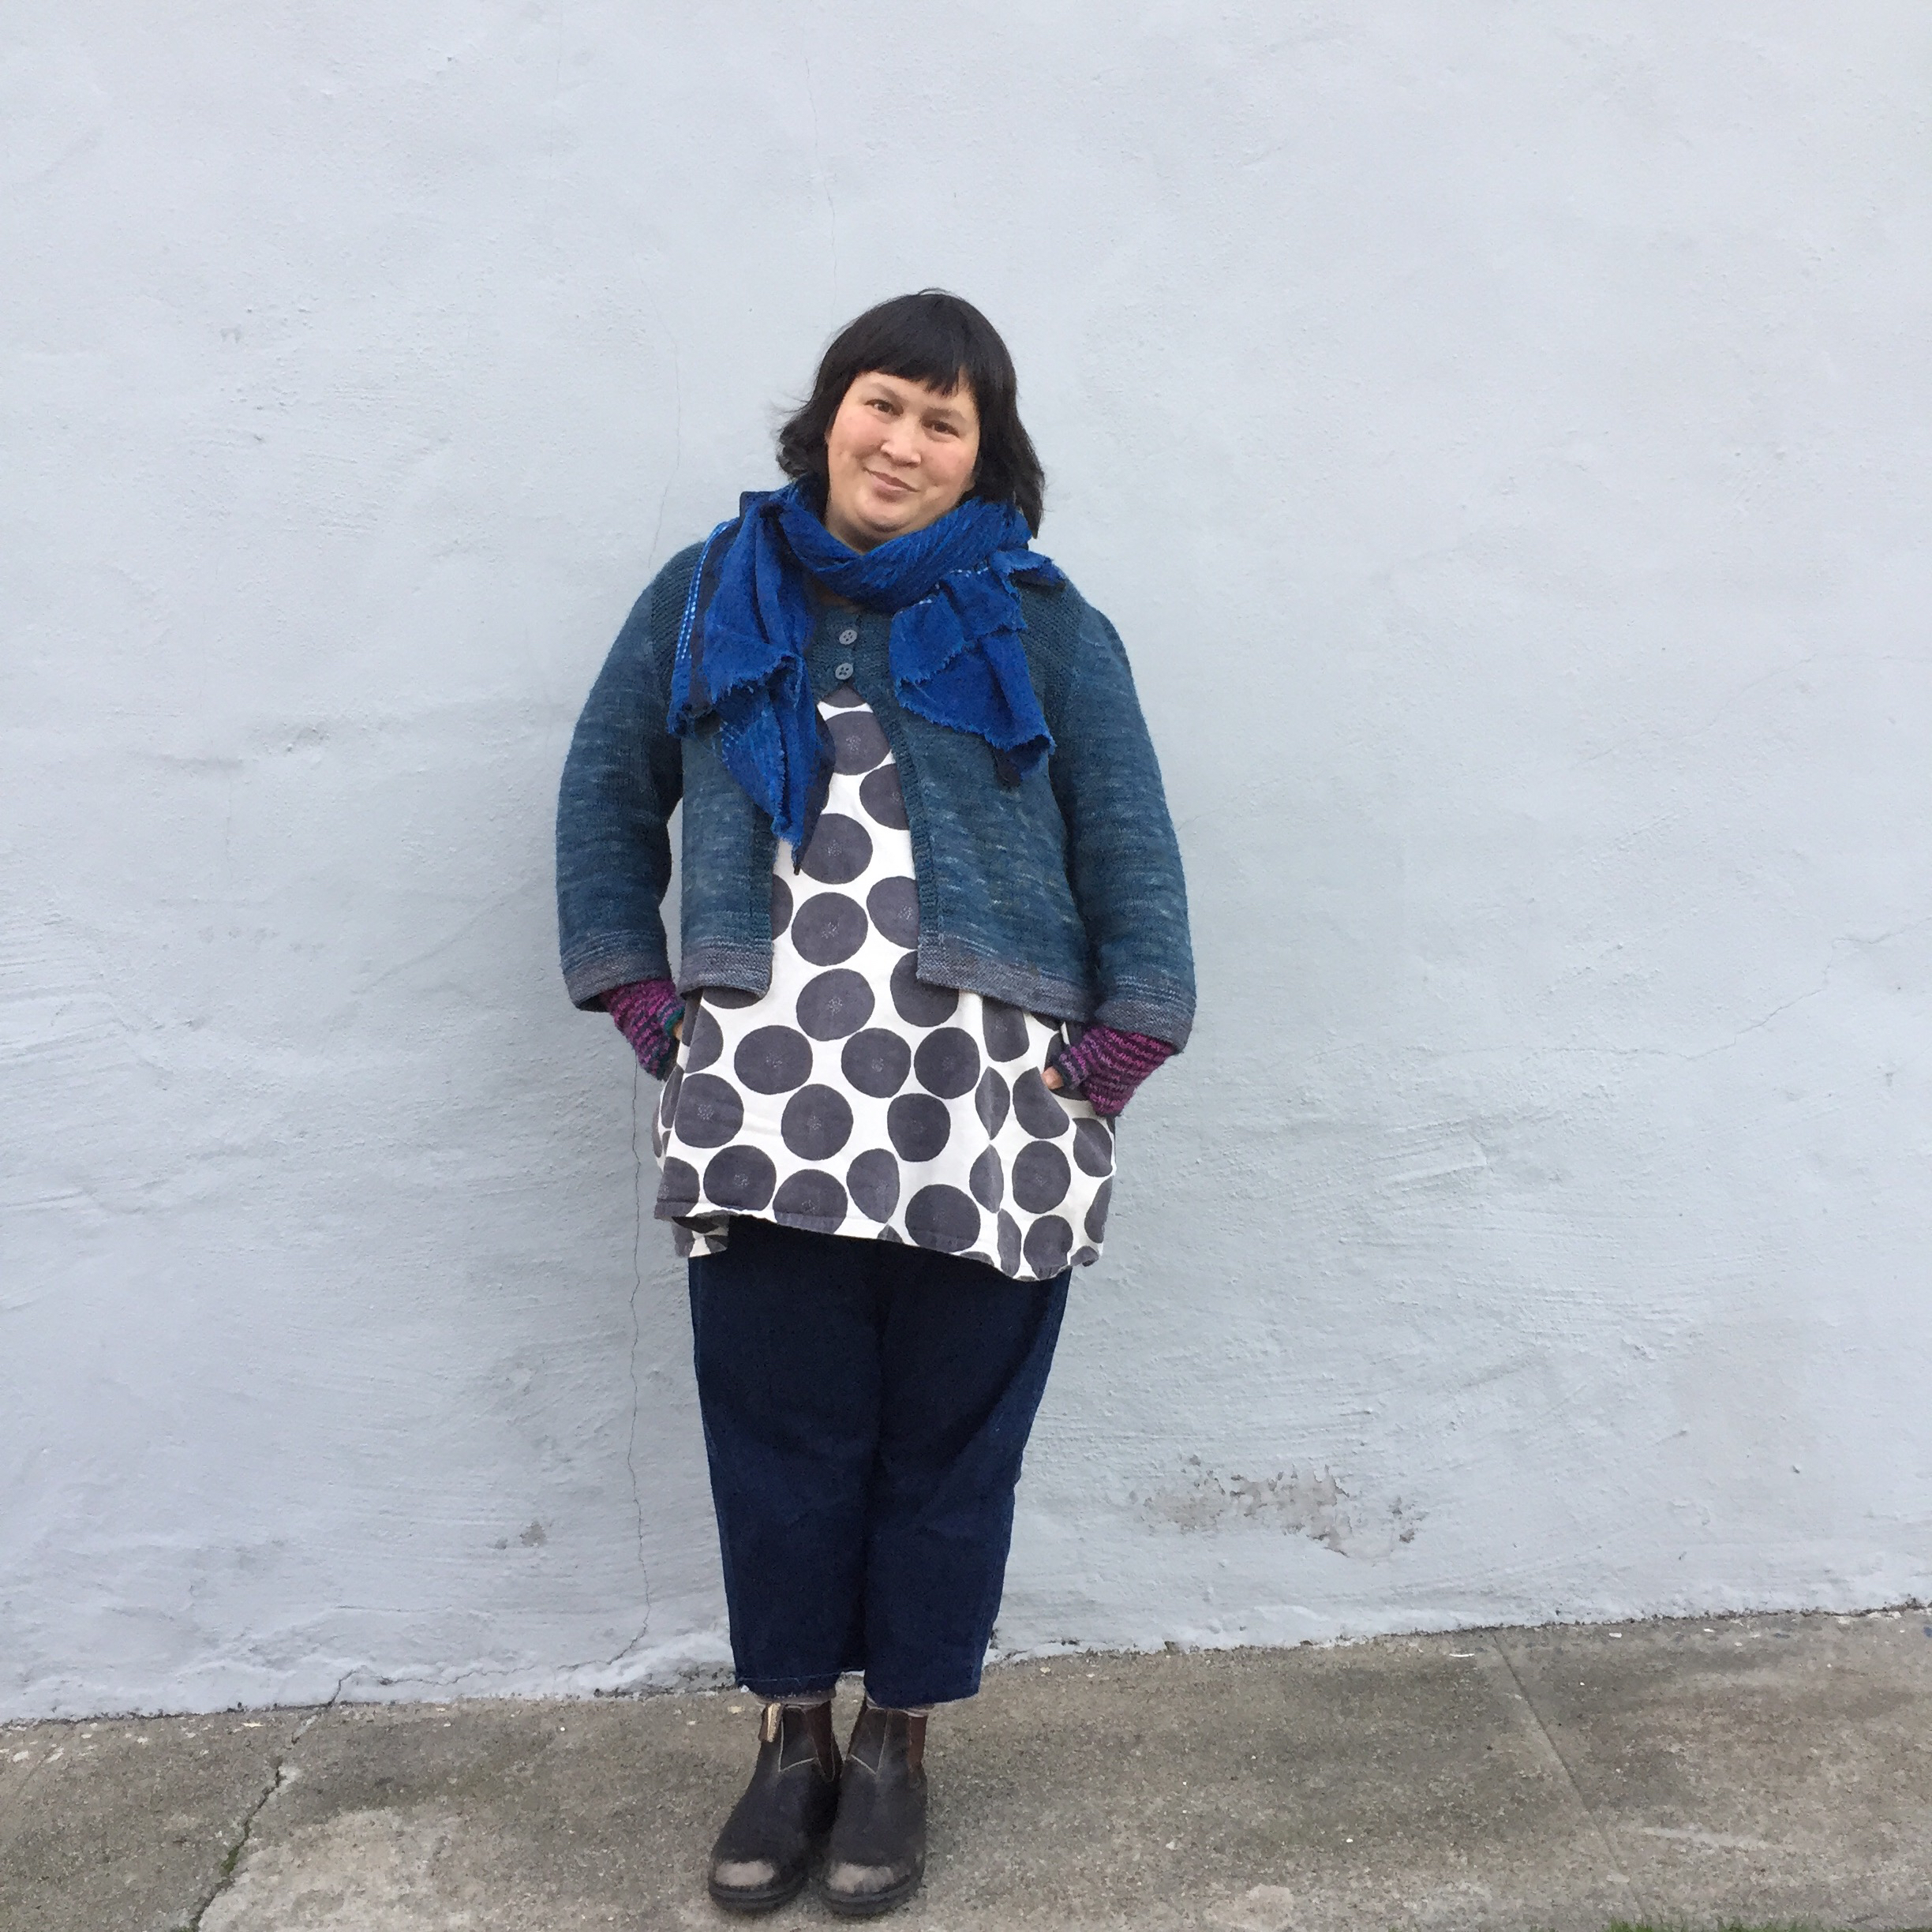 Sonya Philip: New Year's Day edition of #handmadewardrobechronicles wearing an indigo dyed scarf; Cria cardigan pattern by @ysolda; modified #100actsofsewing Dress no. 1; denim pants (own pattern); Blunstone boots